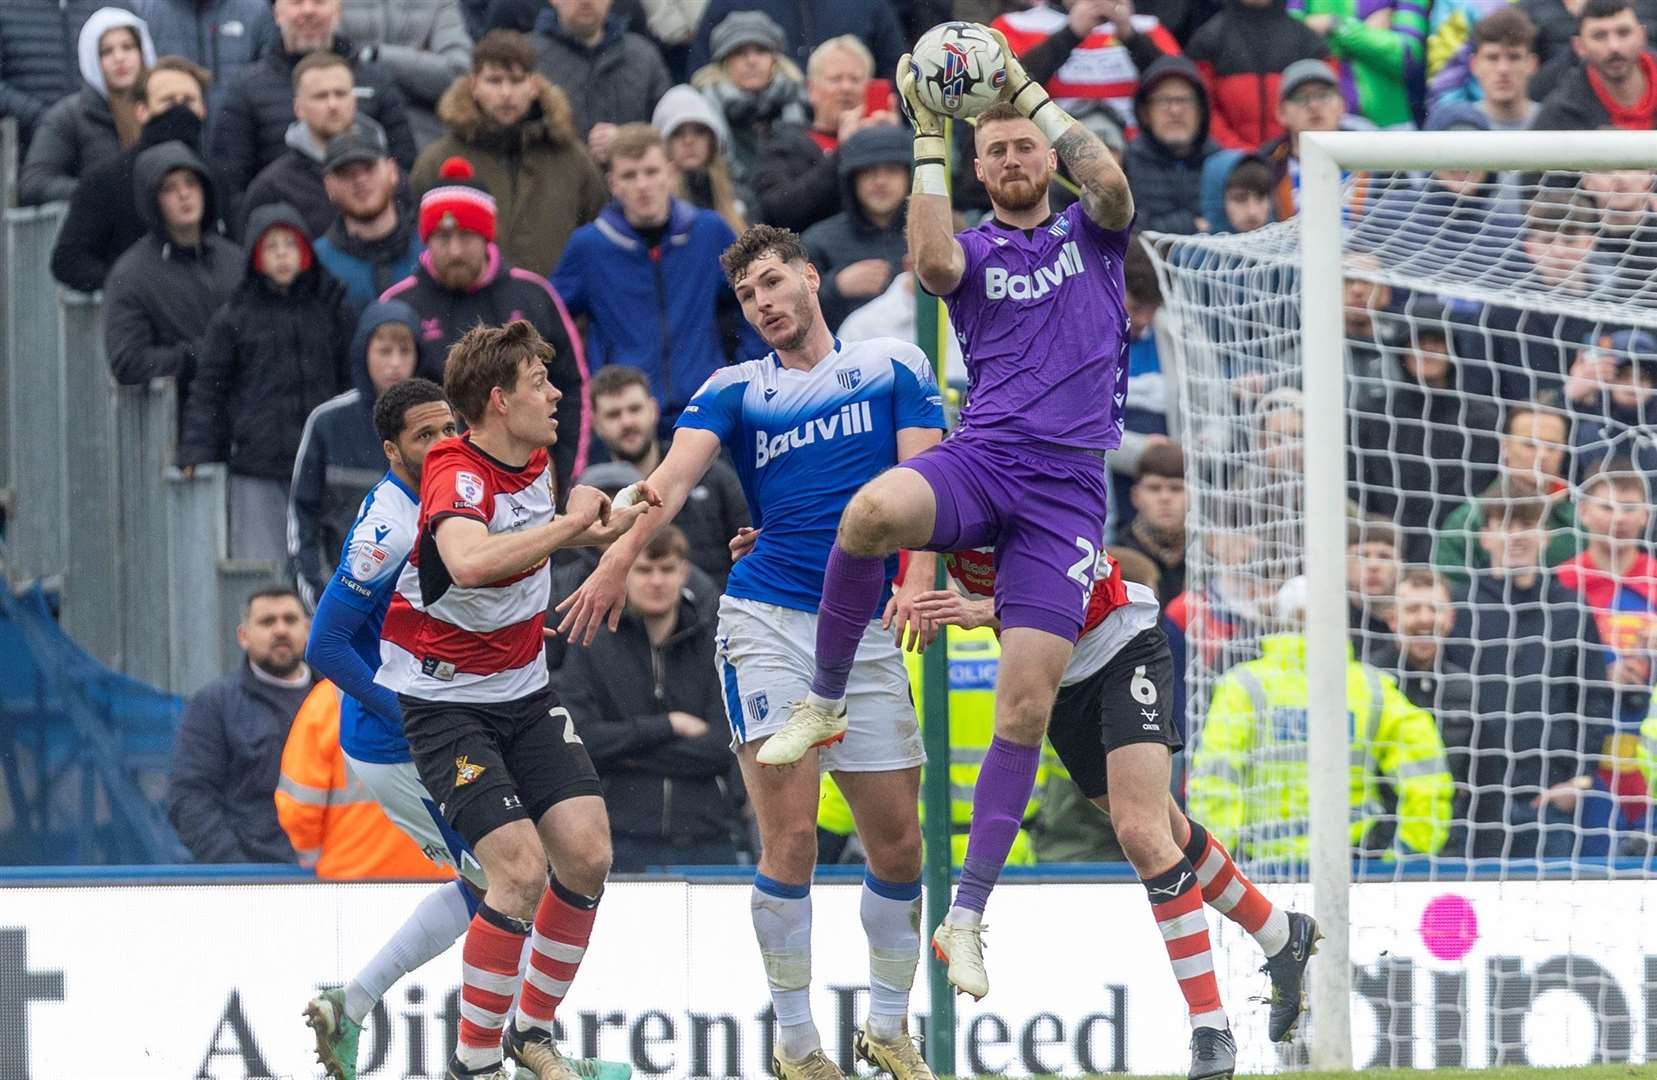 Jake Turner takes a catch as Gillingham fight back to draw with Doncaster Rovers Picture: @Julian_KPI